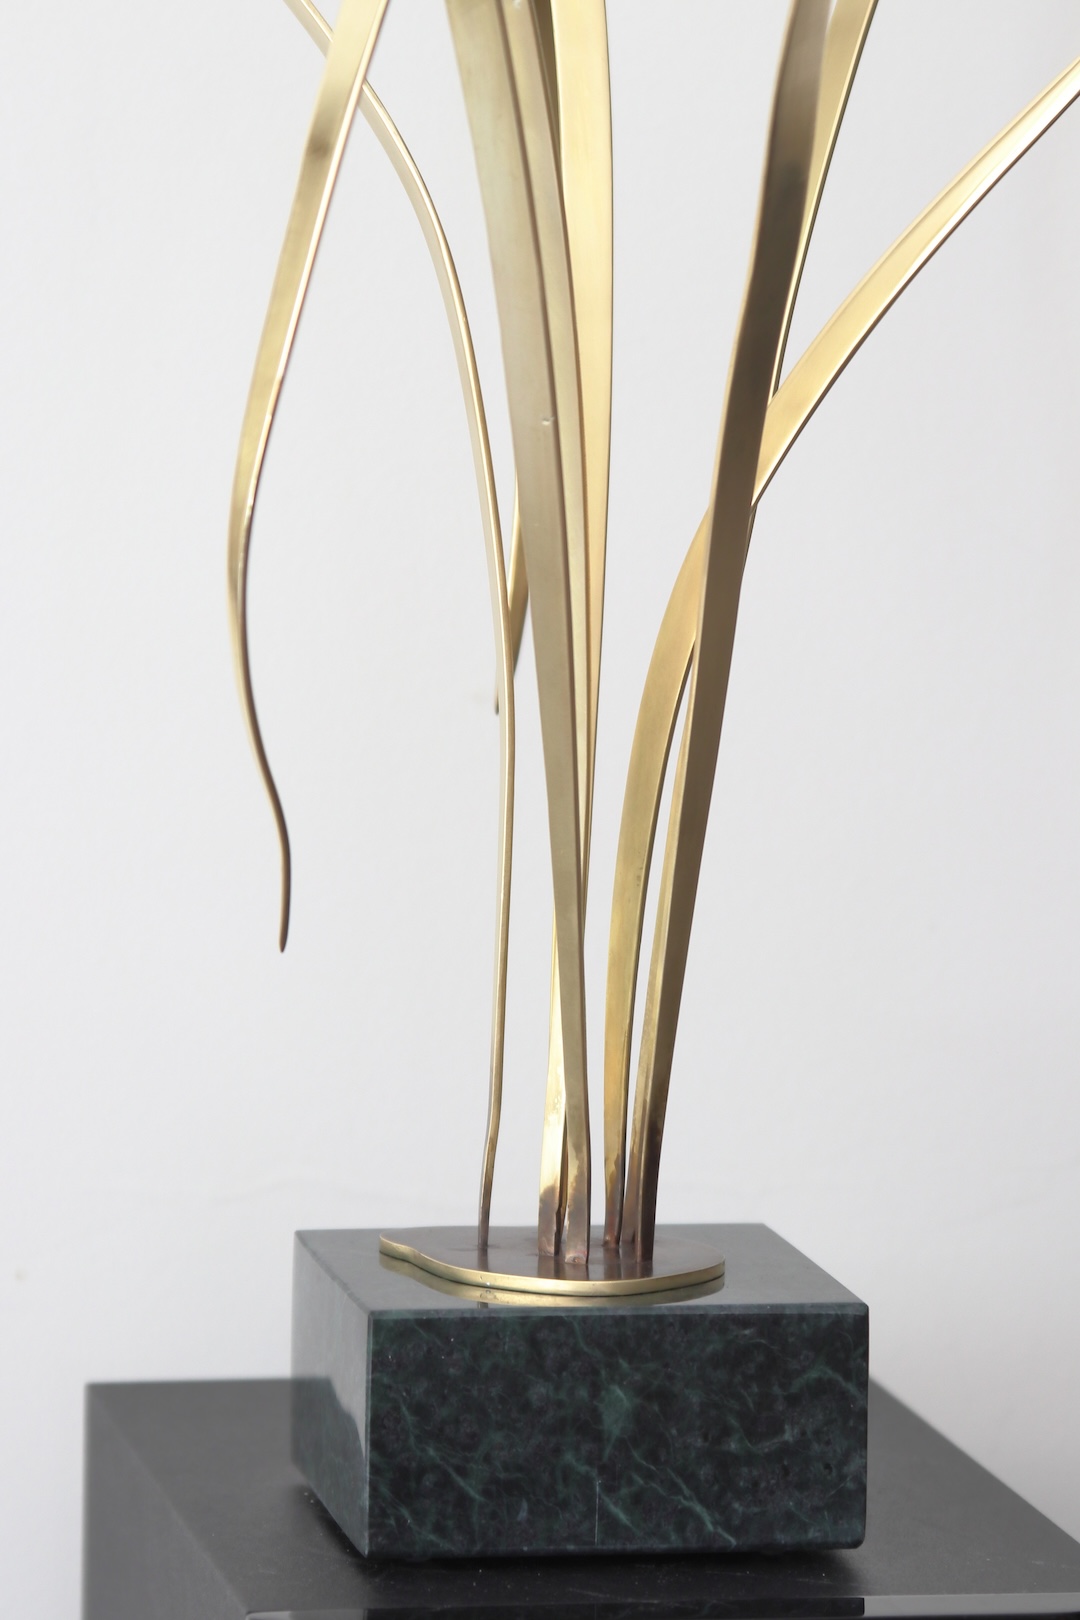 Brass sculpture inspired by nature